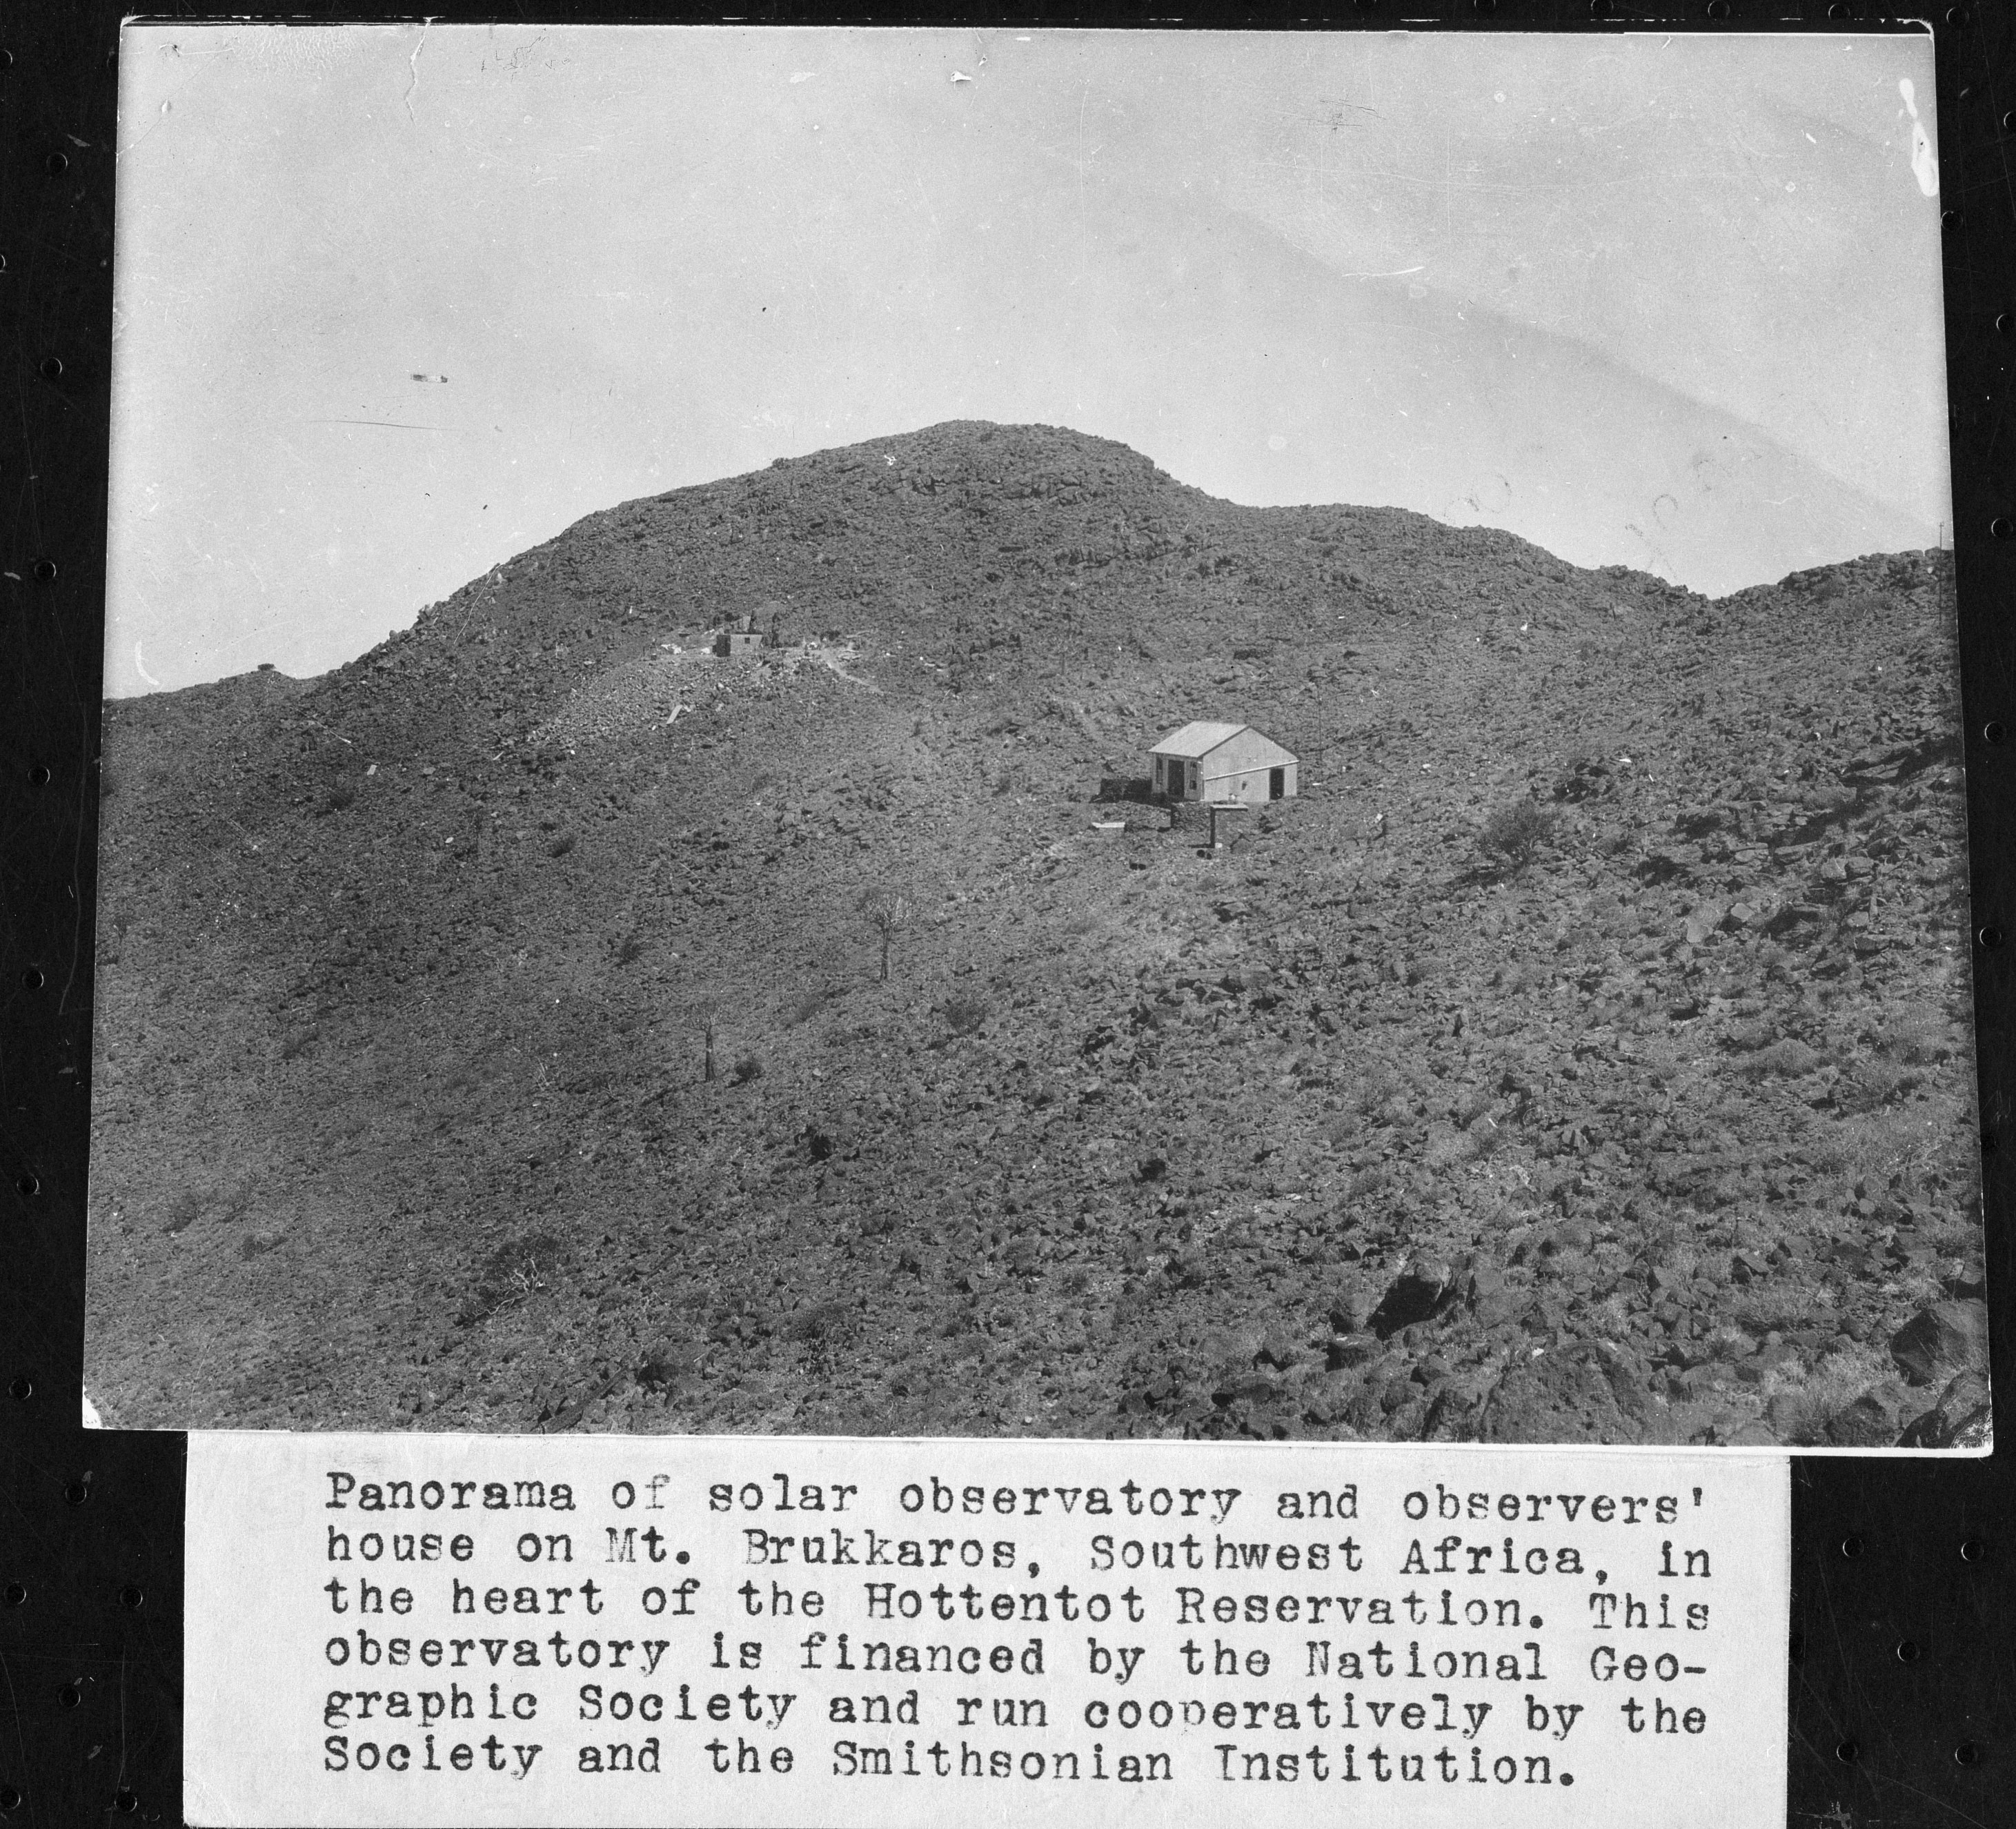 View of a structure on a mountain. The caption below the photograph reads: "Panorama of solar observ